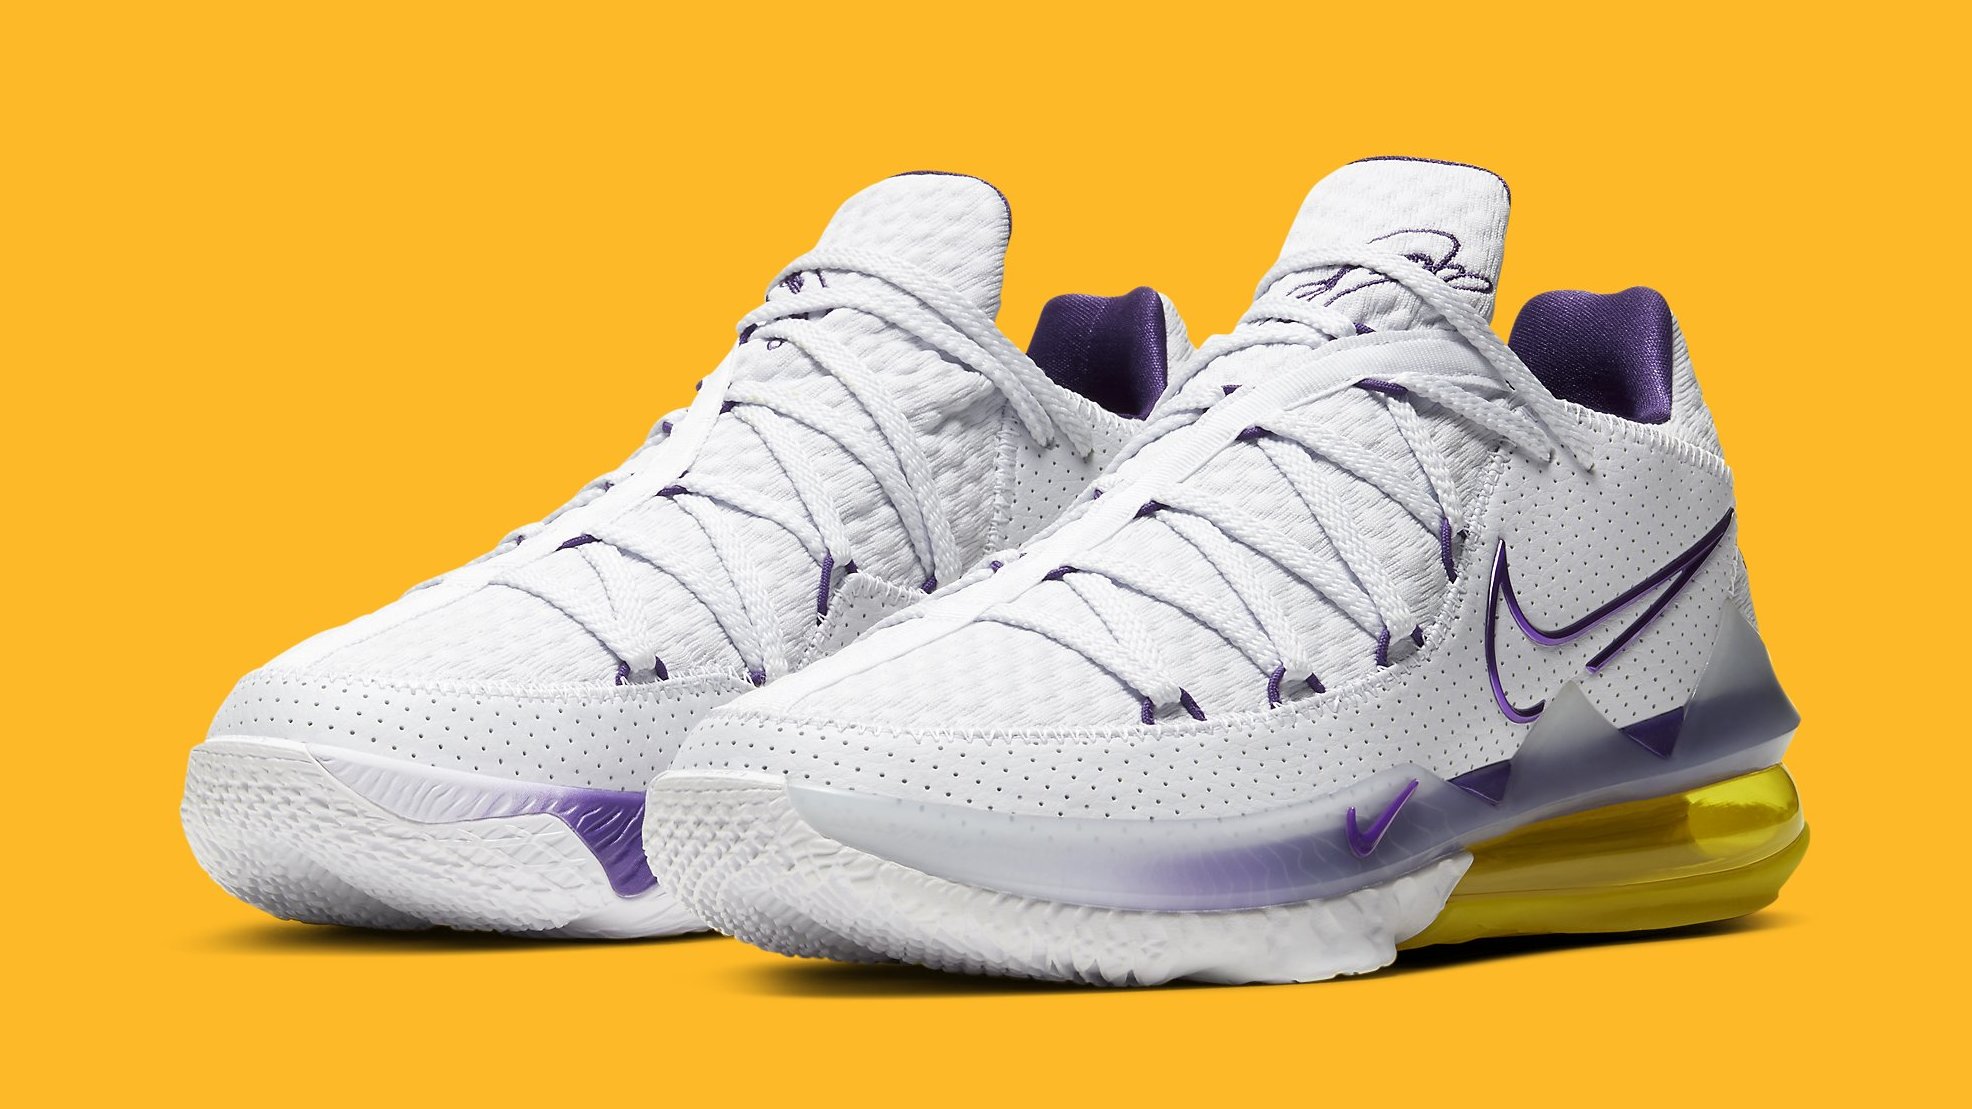 The Nike LeBron 17 Low Gets Dressed in 'Lakers' Colors